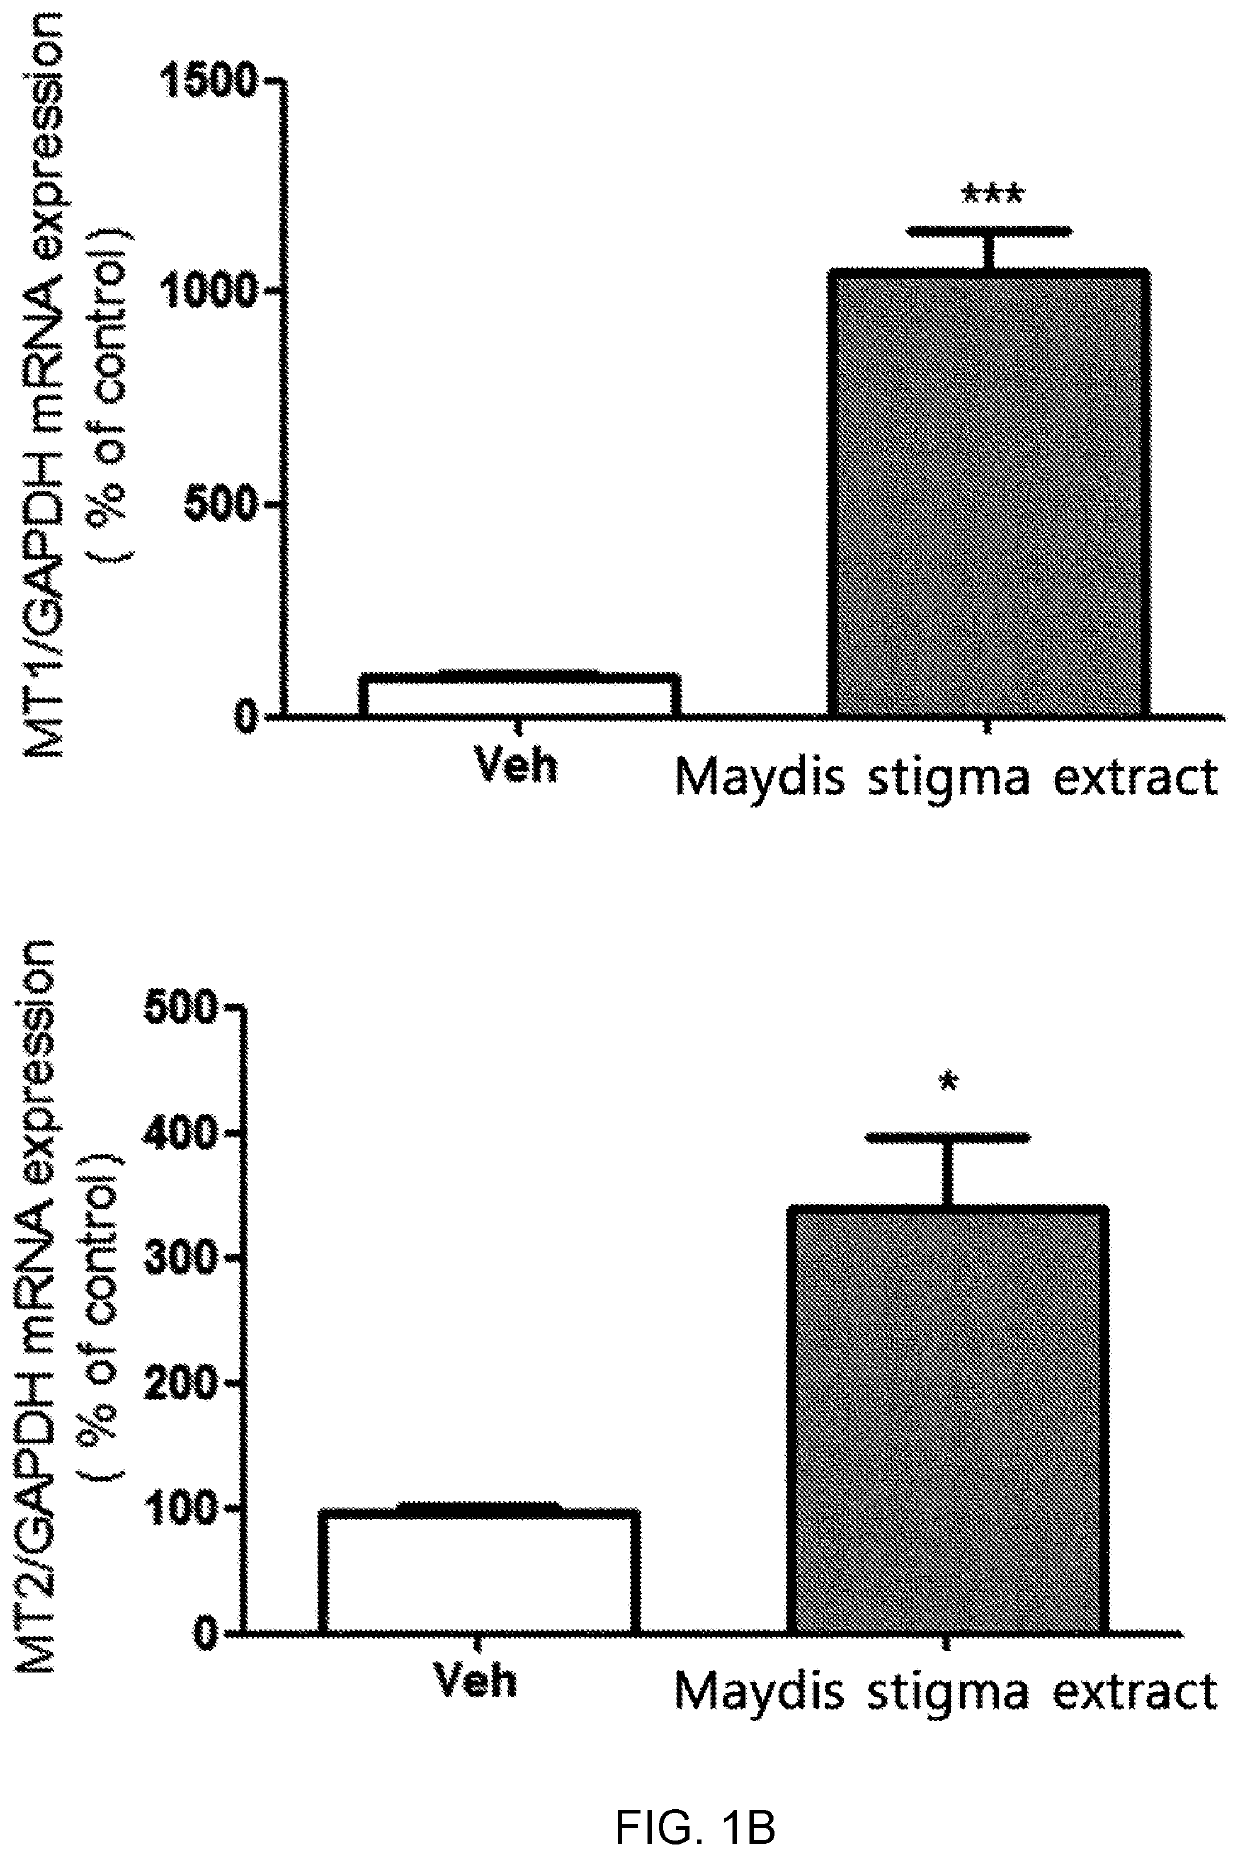 Novel use of maydis stigma extract in prophylaxis and therapy of sleep disorder